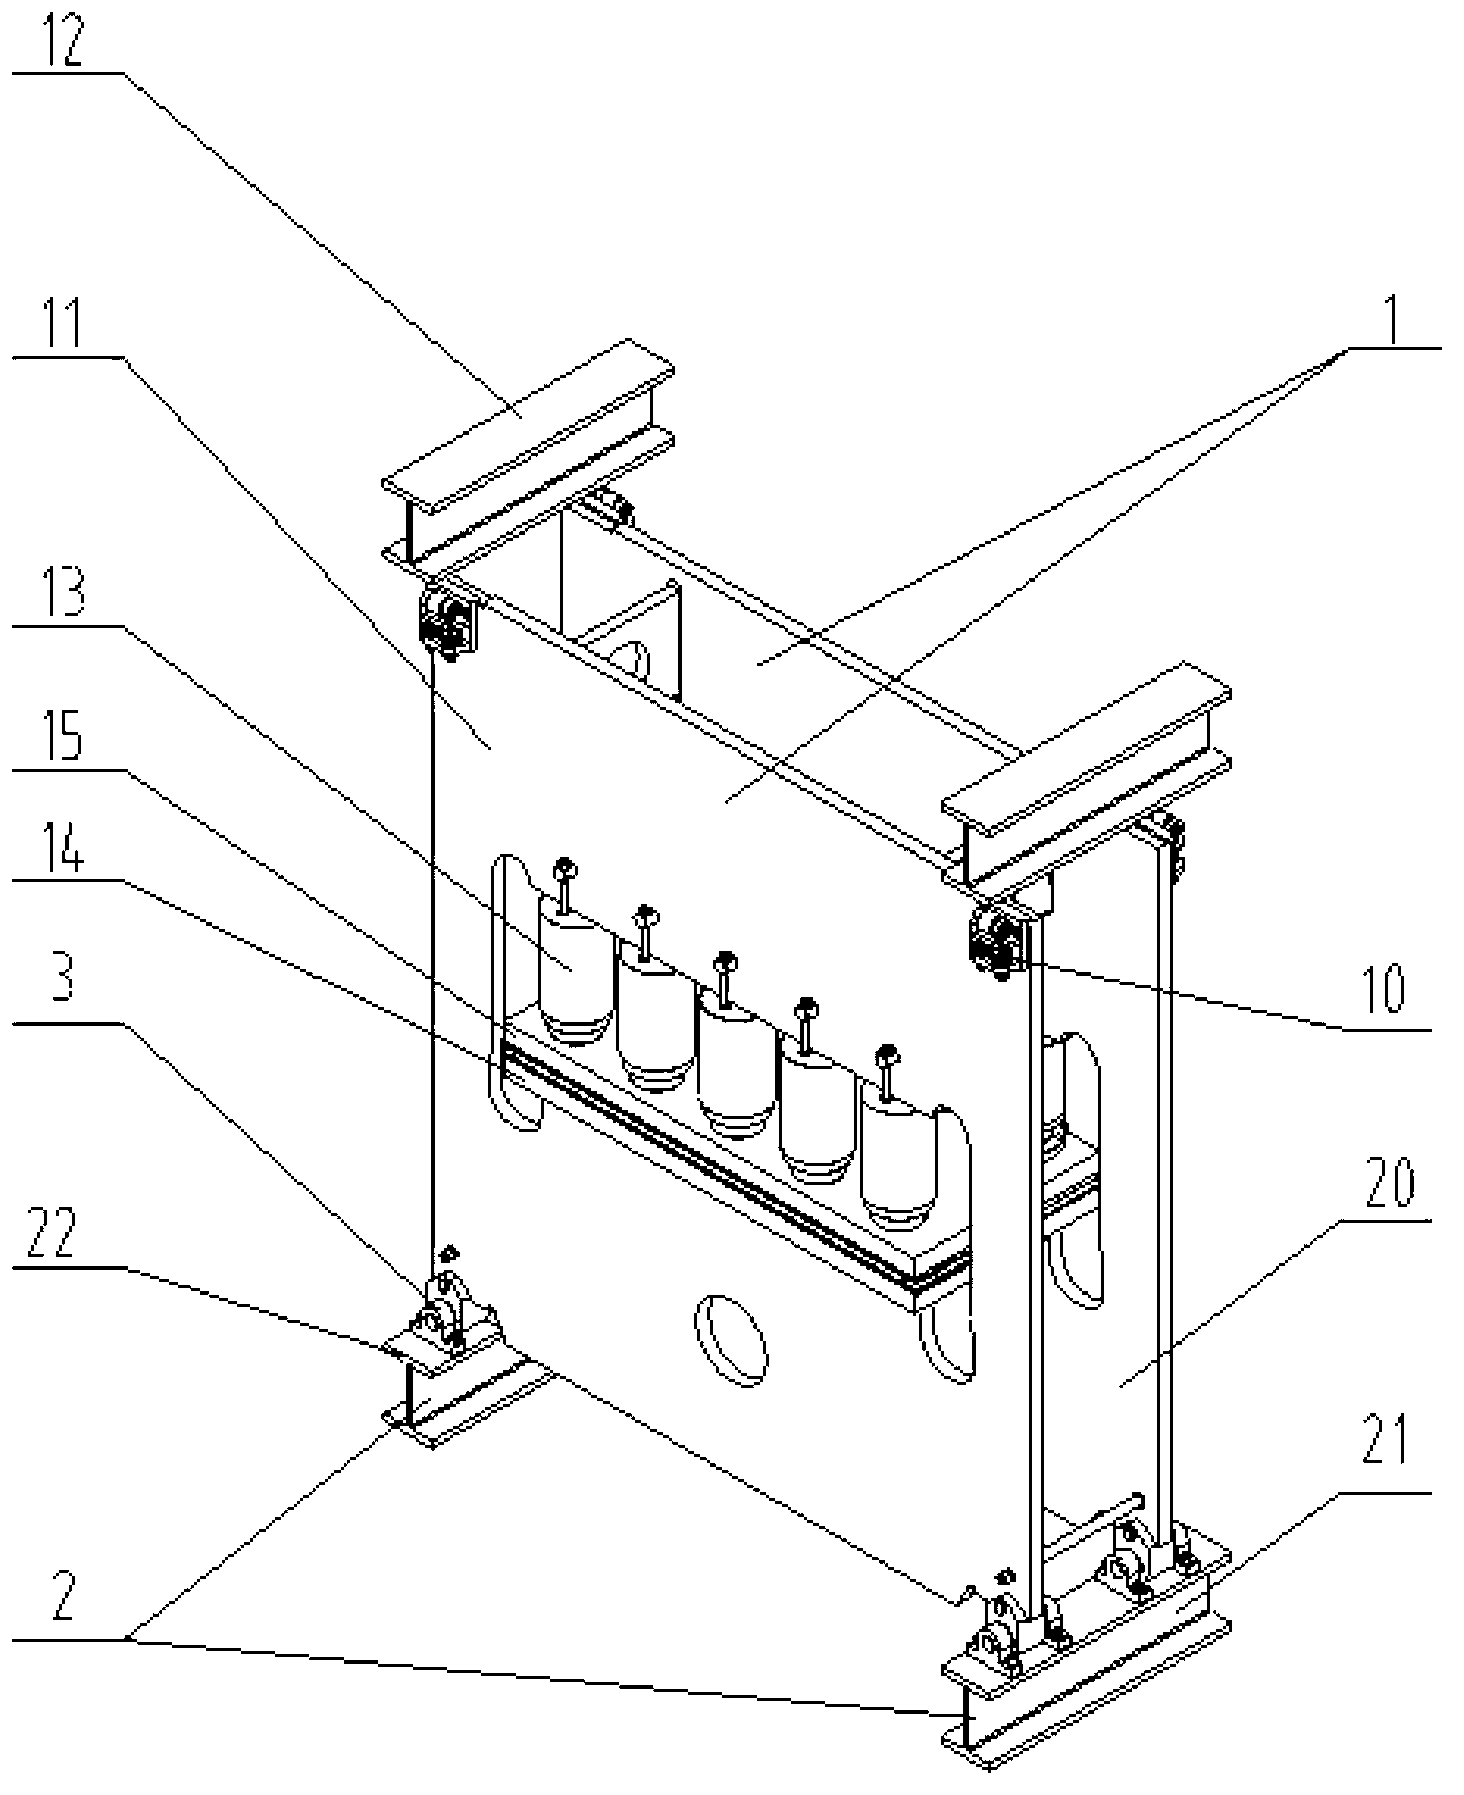 Continuous press frame assembly and continuous press